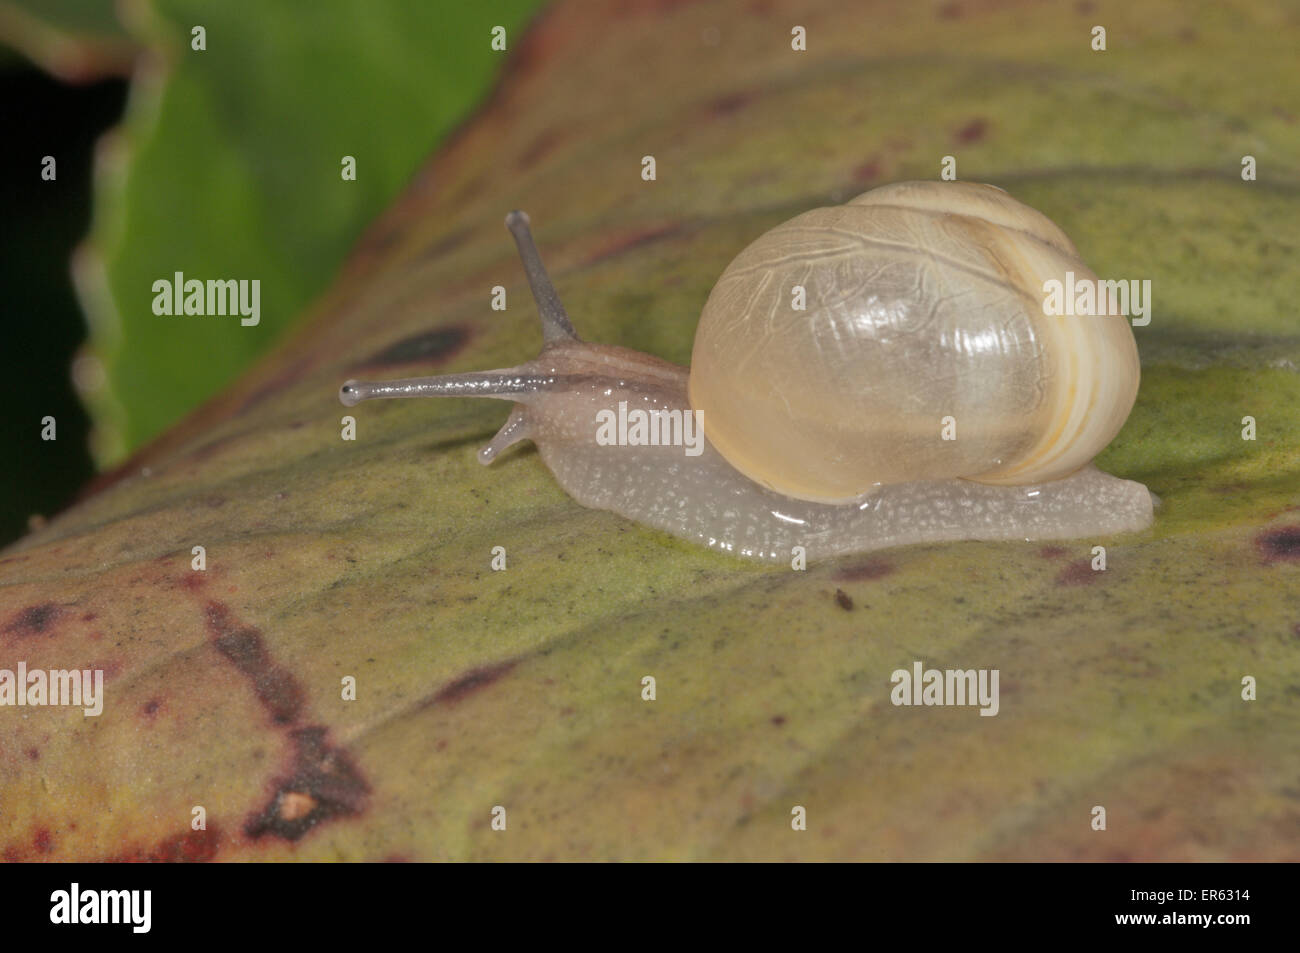 White-lipped Snail (Cepaea hortensis) without banding, Baden-Württemberg, Germany Stock Photo